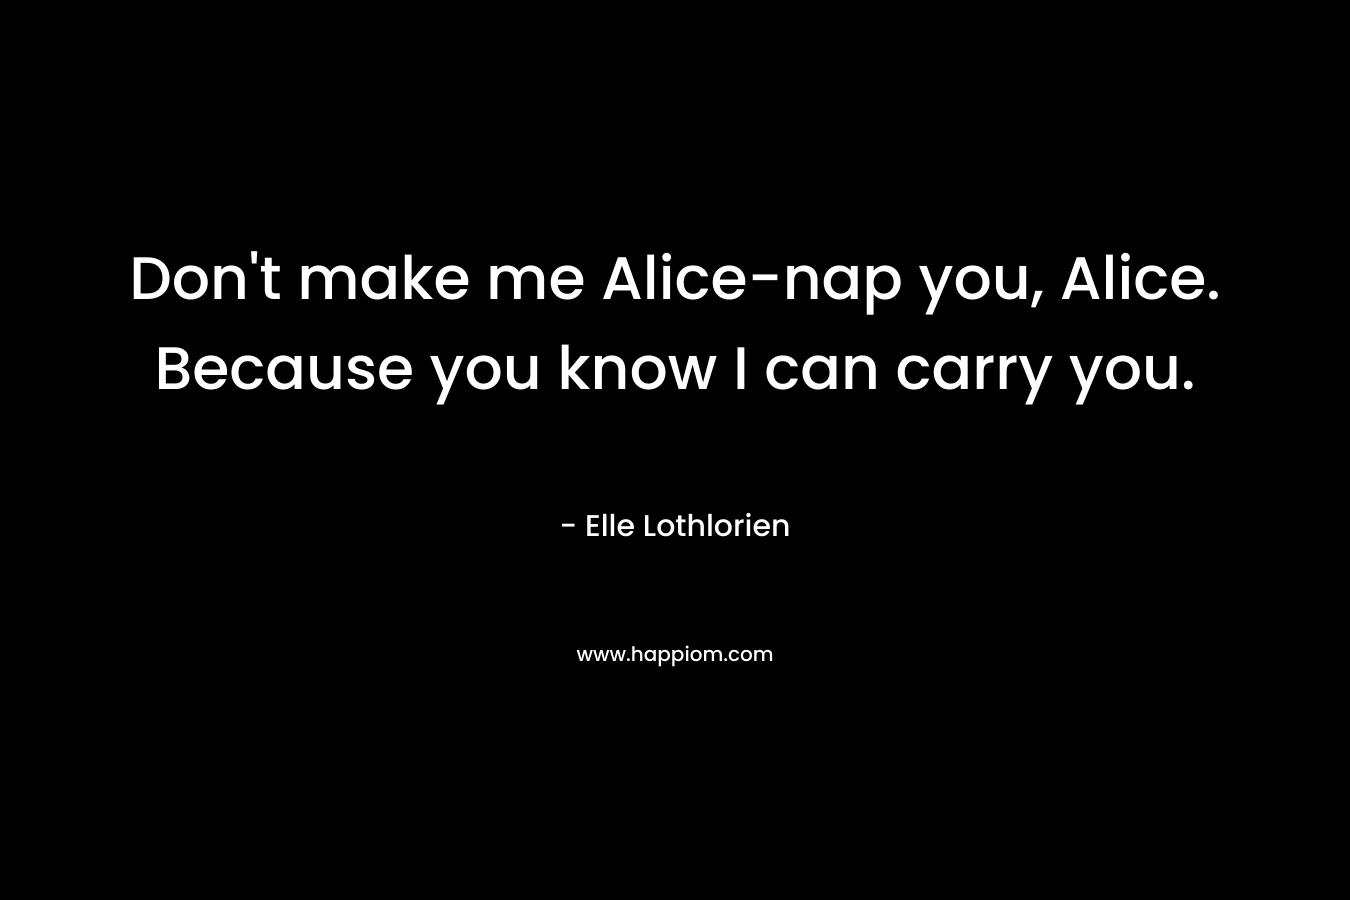 Don’t make me Alice-nap you, Alice. Because you know I can carry you. – Elle Lothlorien